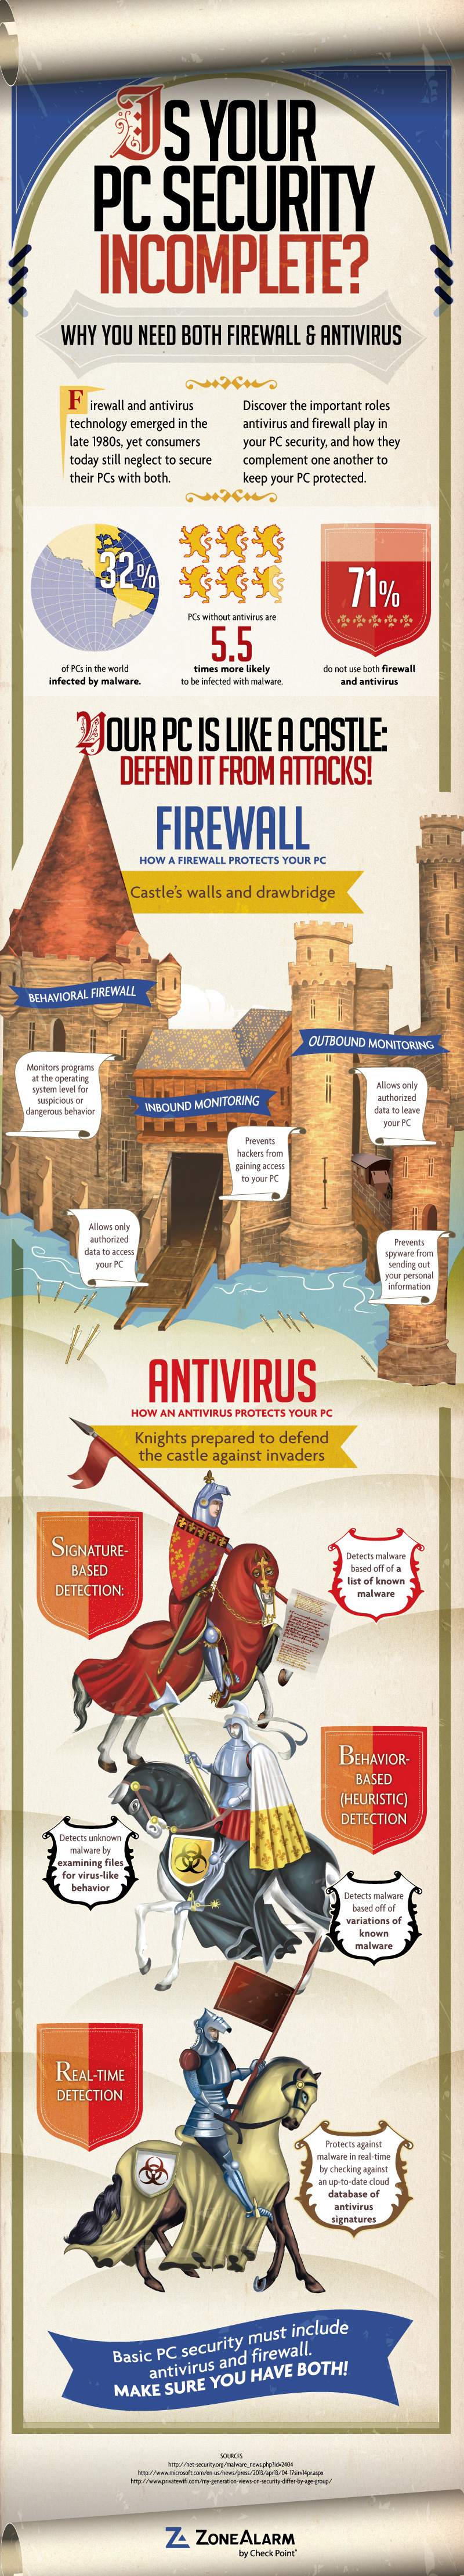 Why you need antivirus and firewall